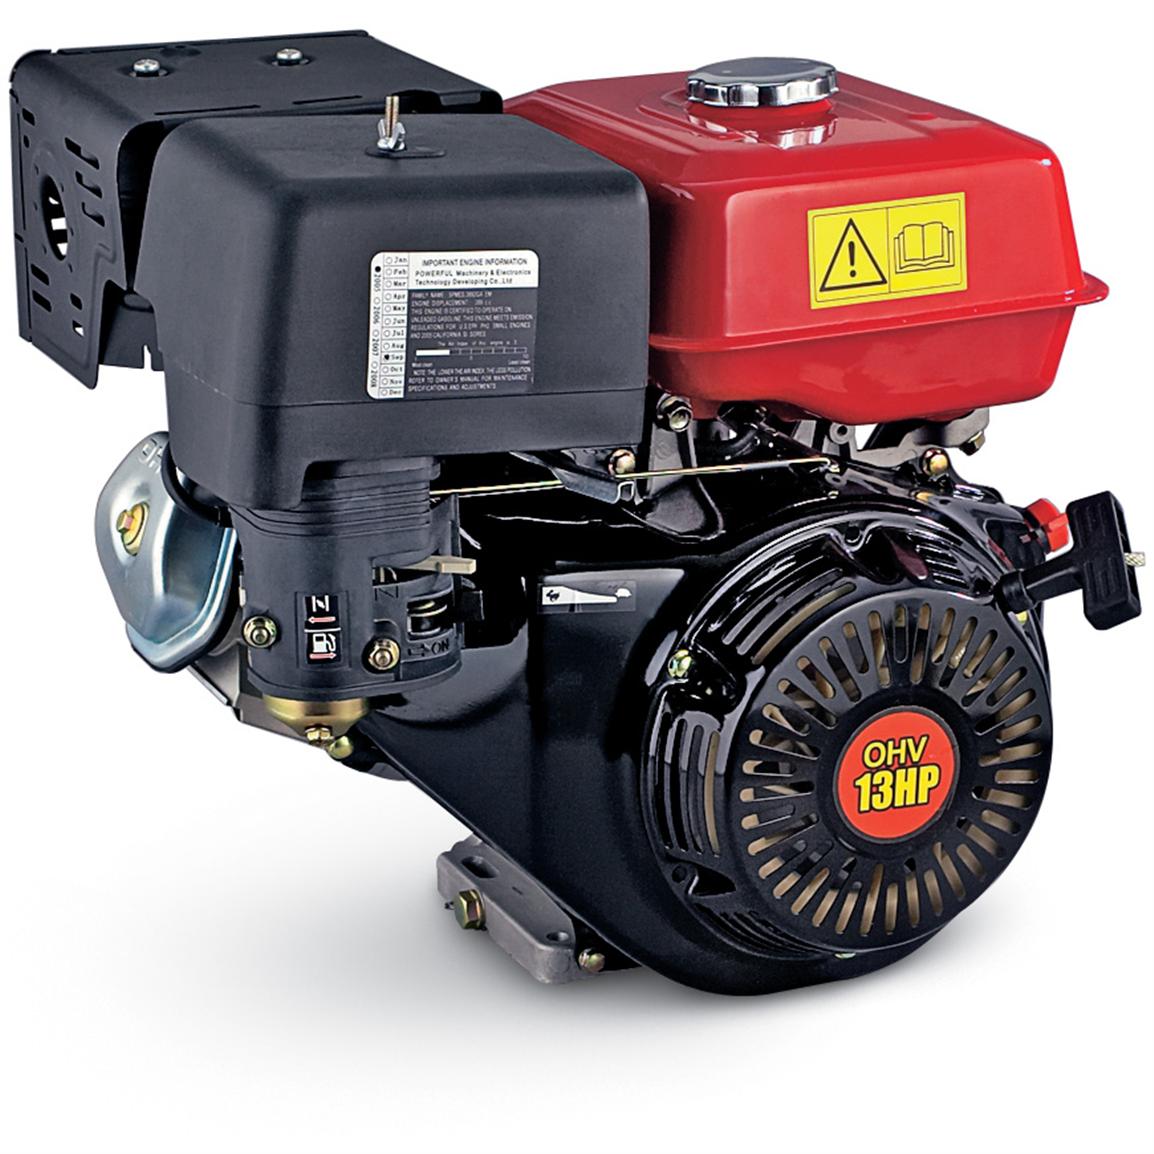 LIFAN 9 hp Gas Engine with Horizontal Shaft Electric and Recoil Start